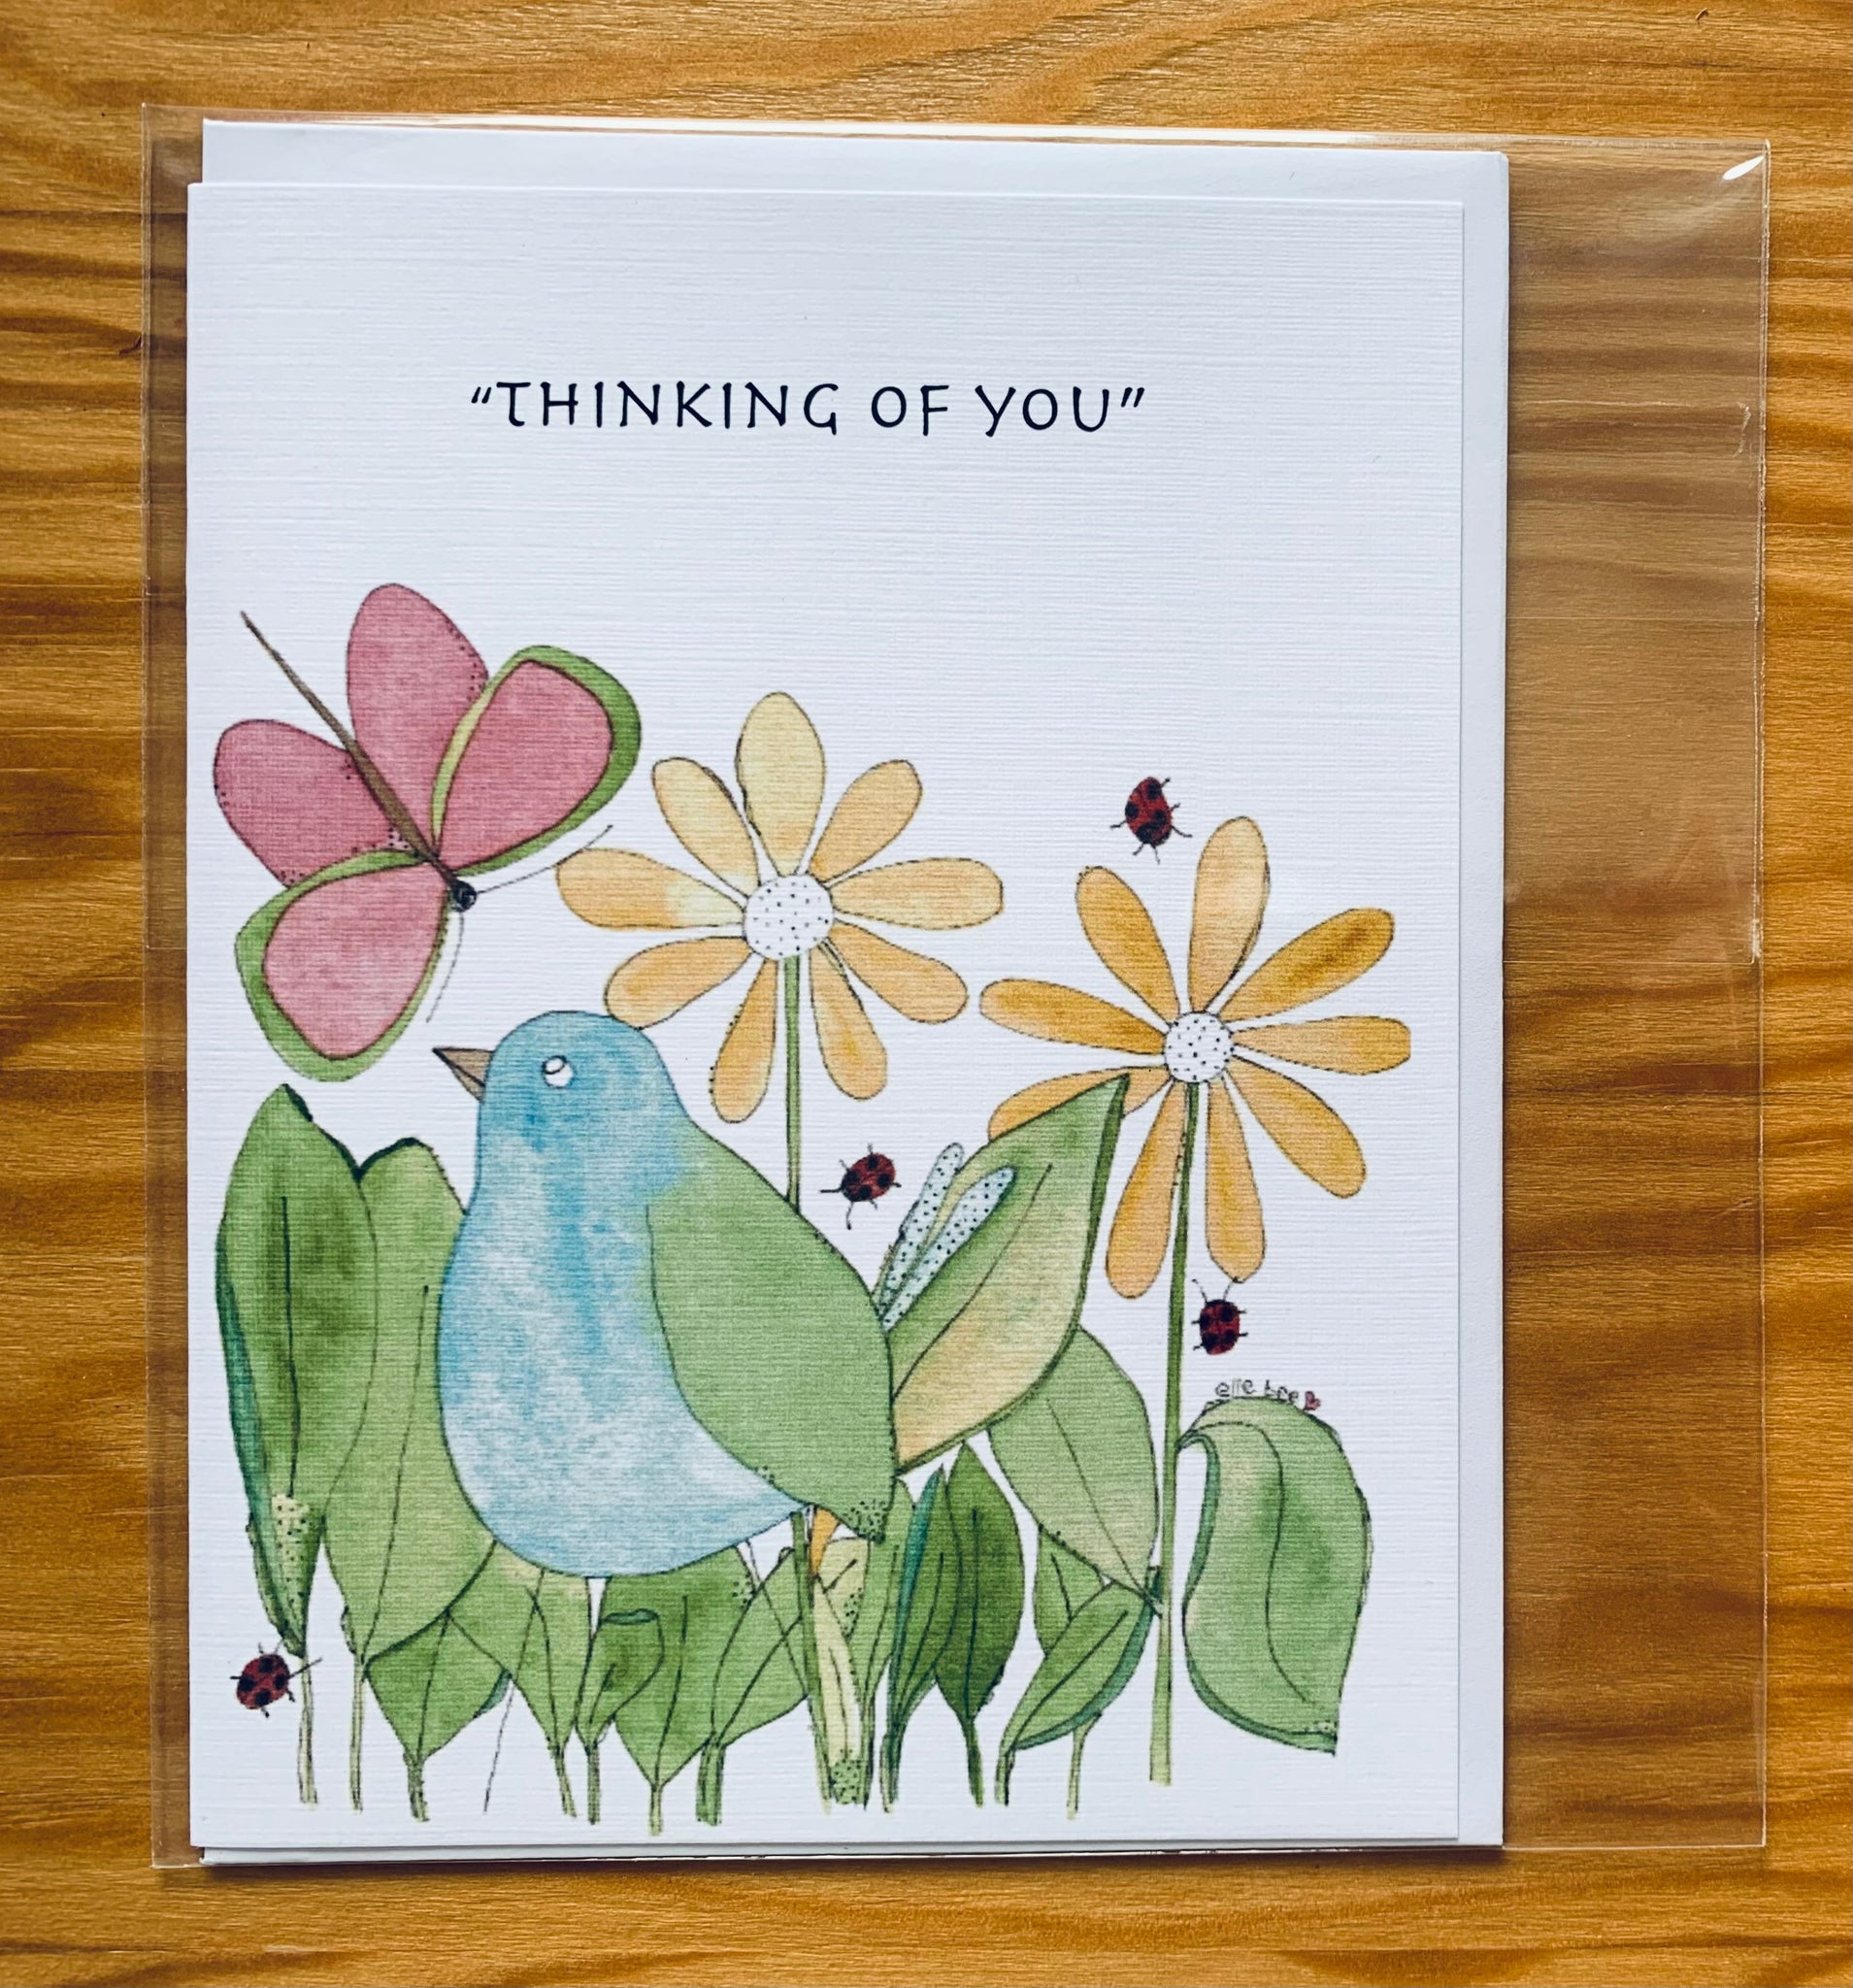 "Thinking of you (daisy)" greeting card